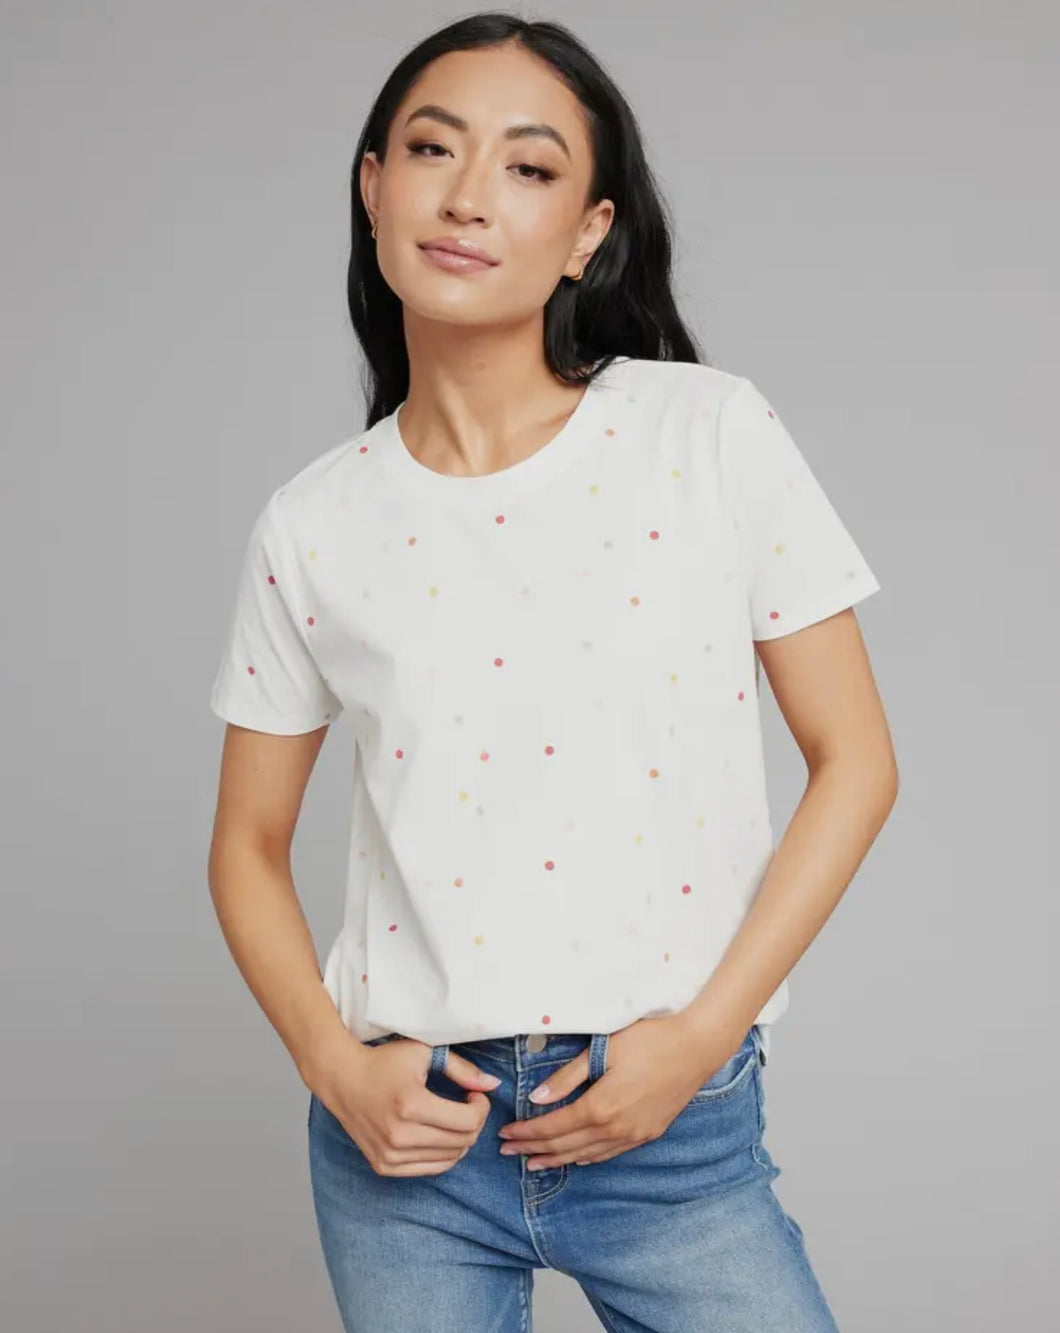 Downeast Dotted tee